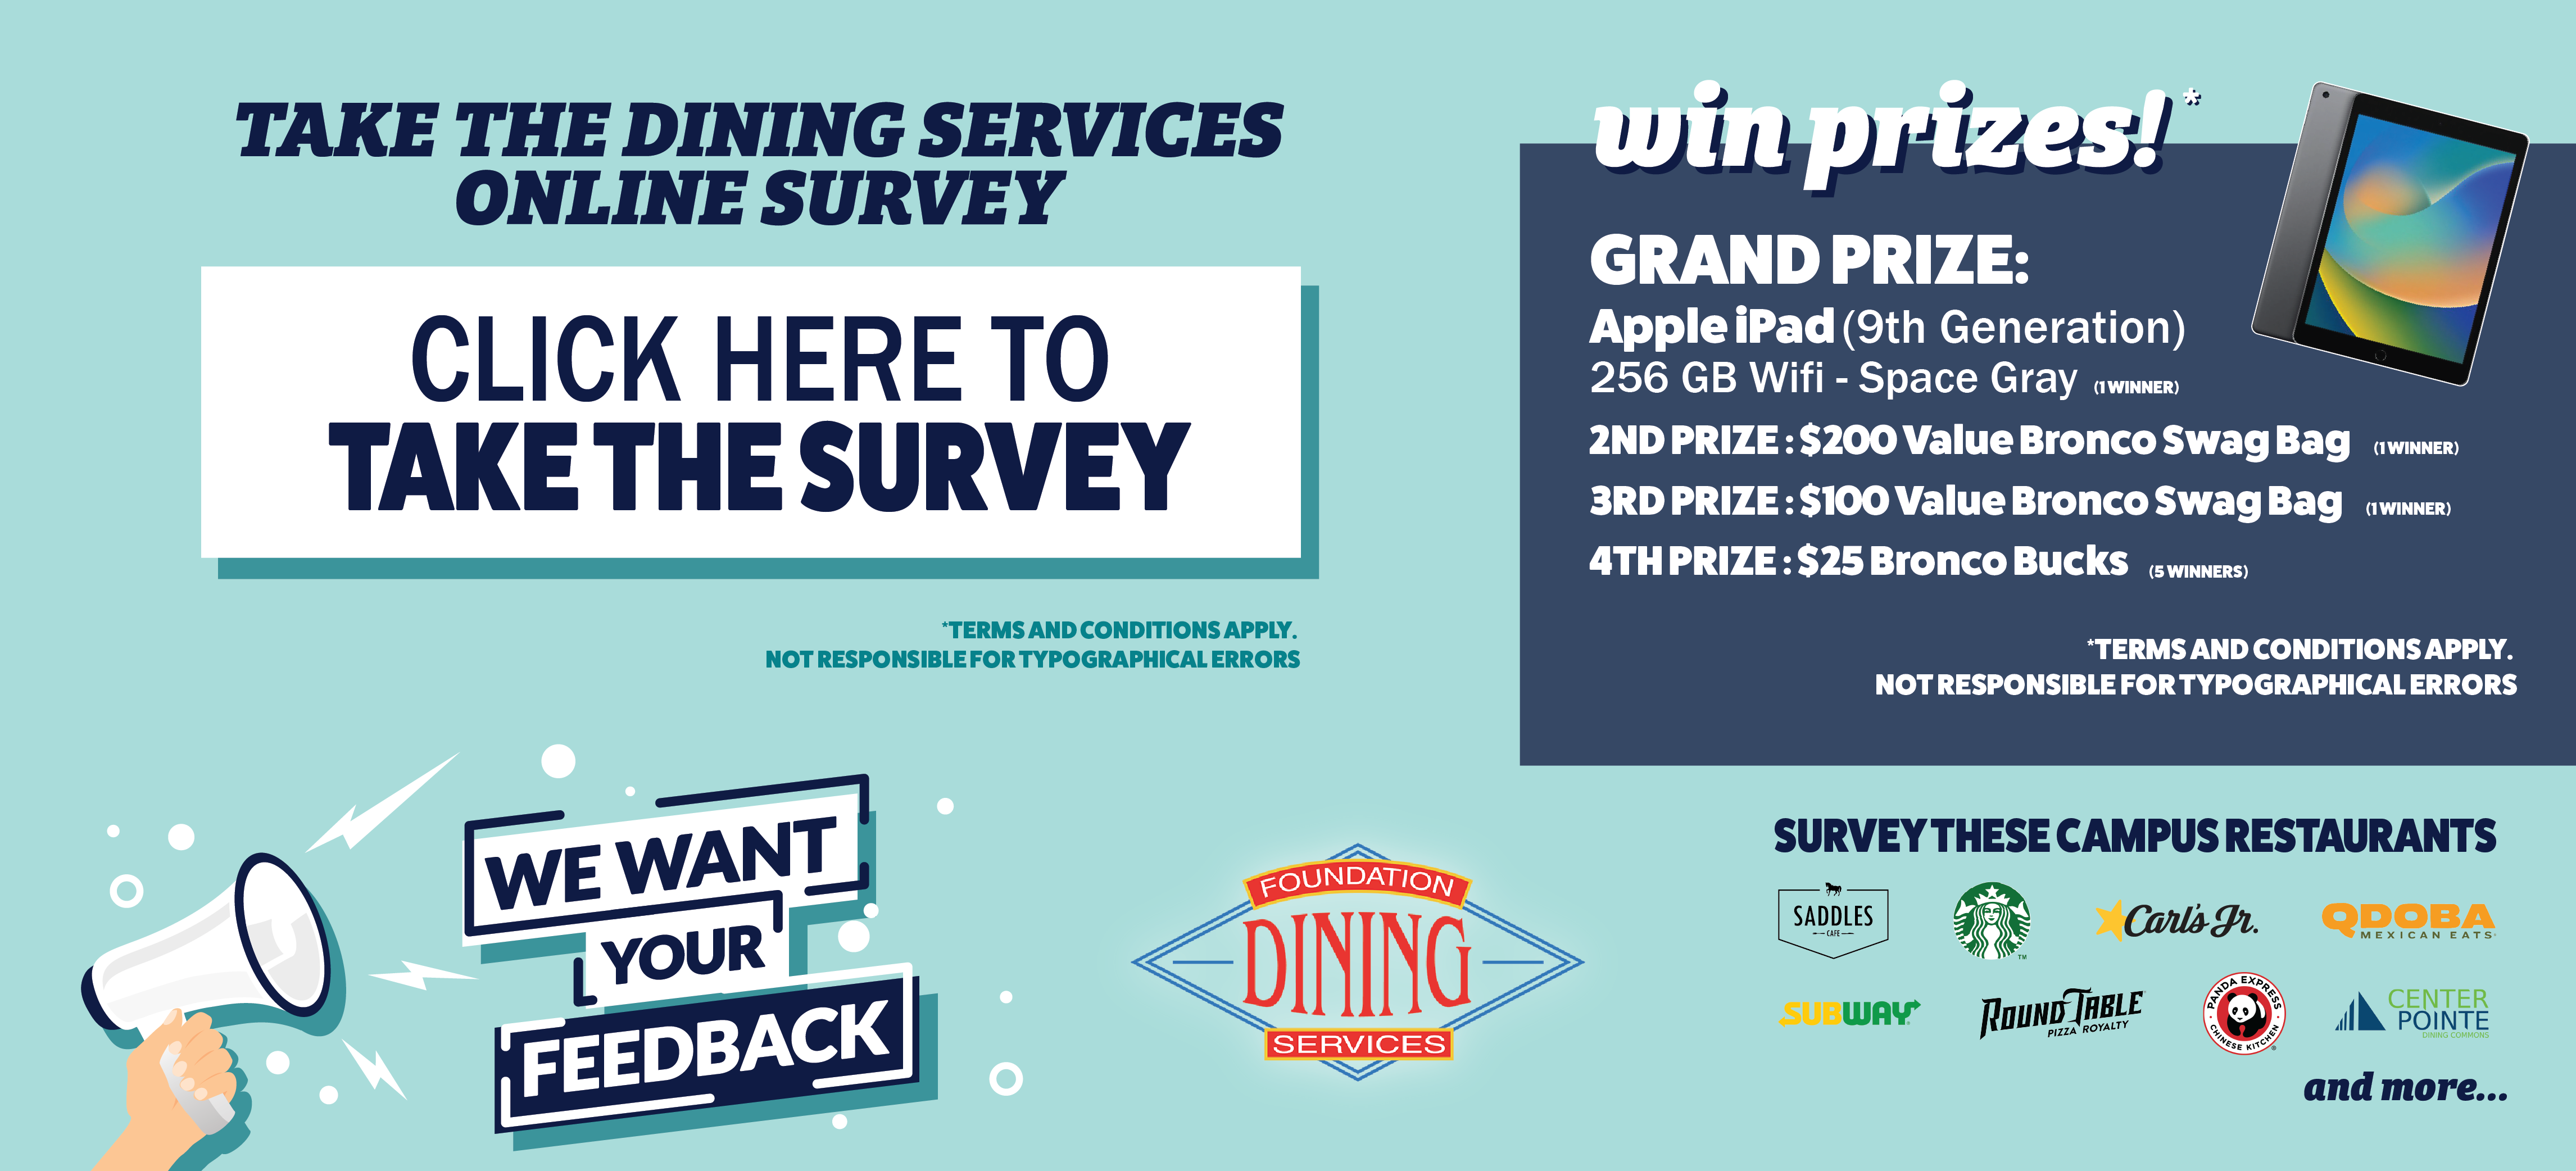 We care what you think.  Take the dining services online survey at cppdining.com/survey/